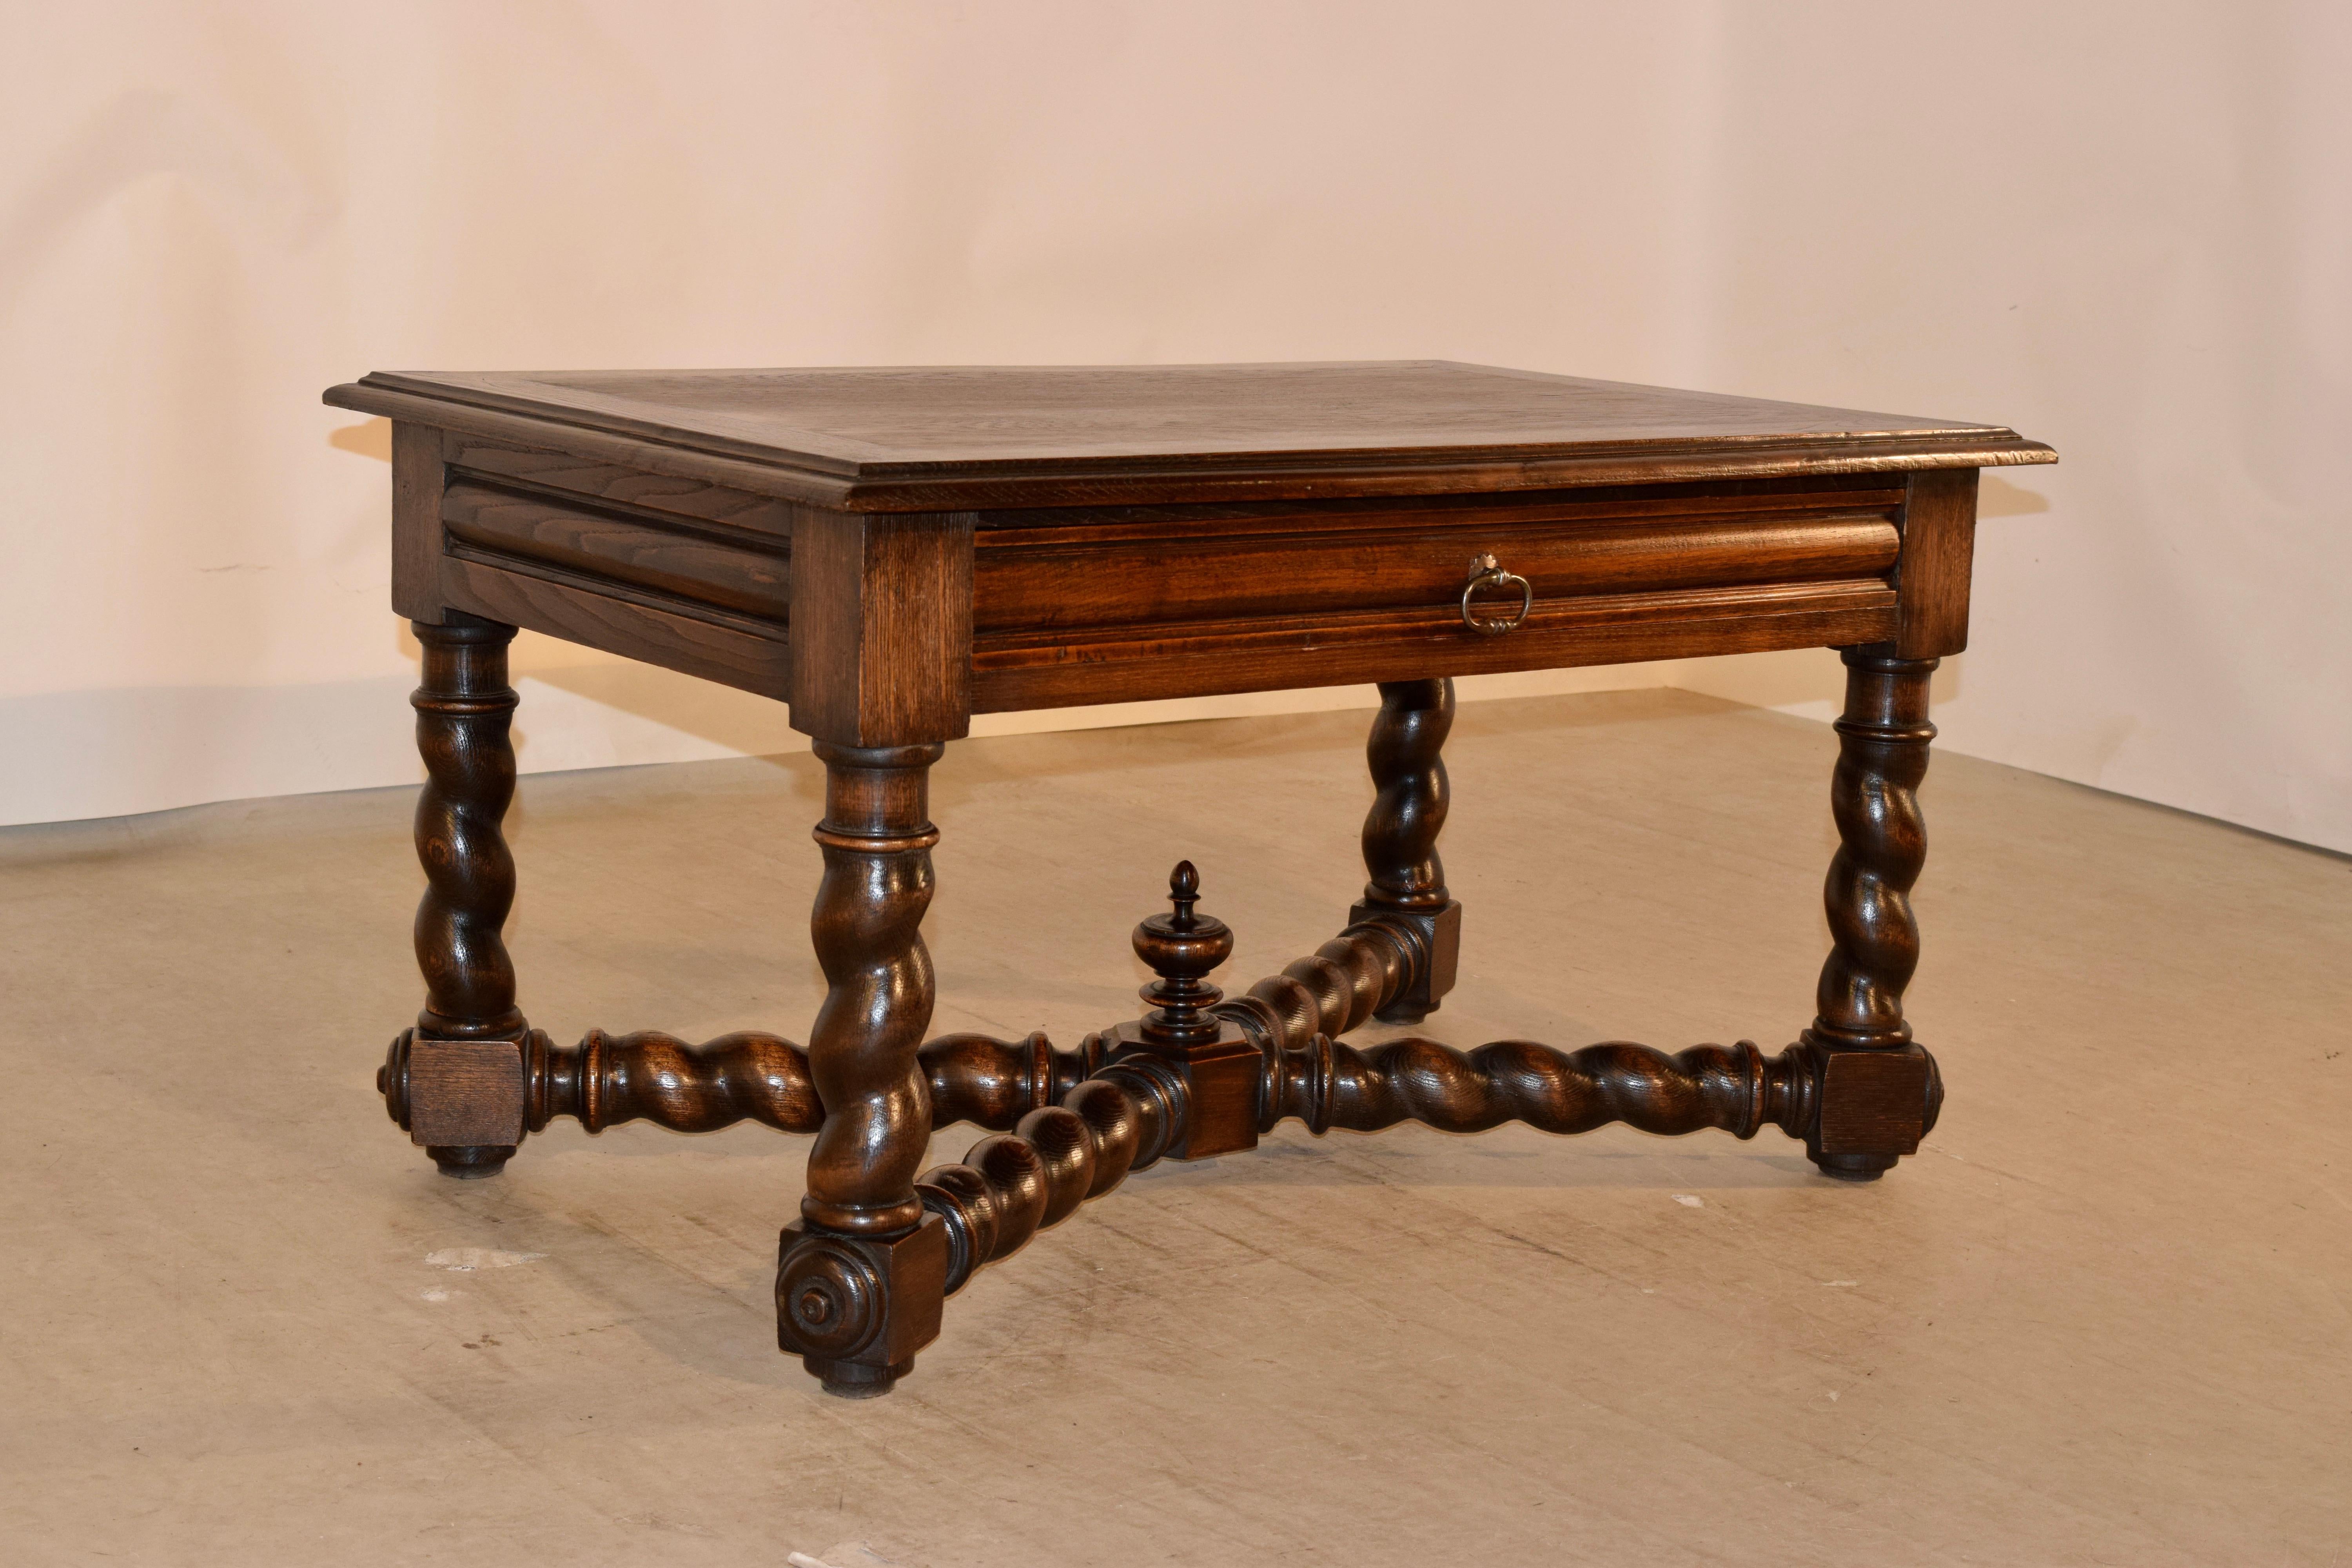 19th century coffee table from France made from oak. The top is banded and has a beveled edge on all four sides. The apron is simple and includes a single drawer. The table is supported on hand-turned barley twist legs, joined by matching cross